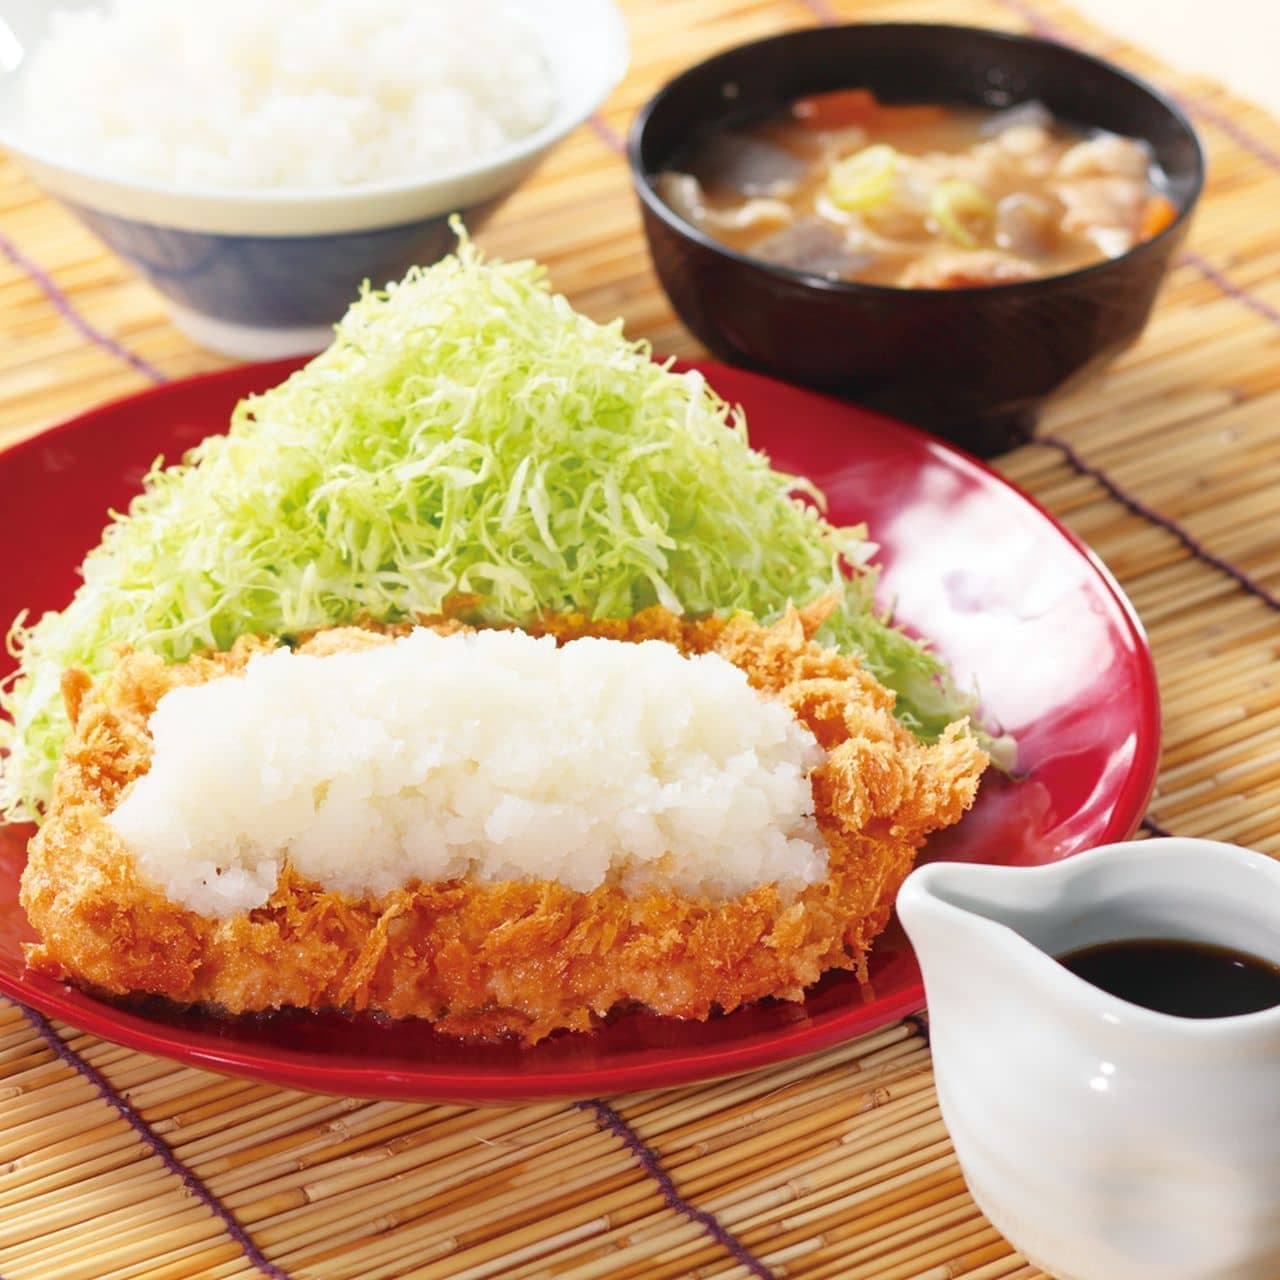 Katsuya "Grated pork cutlet set meal 120g roasted pork cutlet [with rice and tonjiru (small soup)